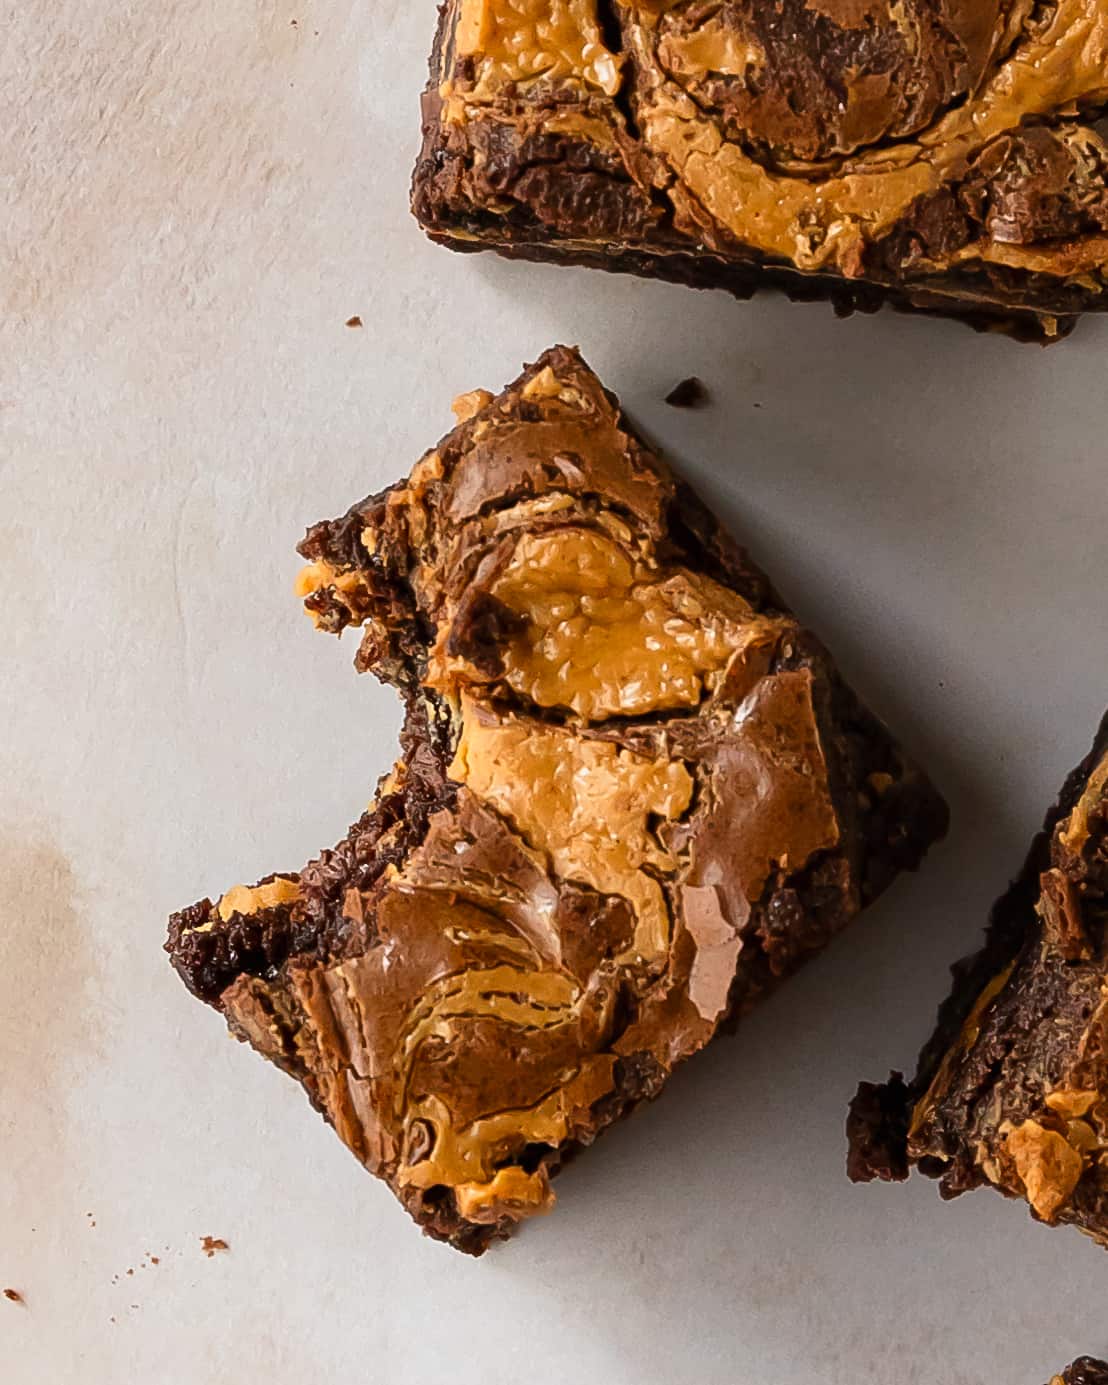 Peanut butter brownies are rich and fudgy brownies stuffed with a layer of creamy peanut butter filling. Top these easy and chewy stuffed brownies with swirls of peanut butter for even more decadent chocolate and peanut butter cup flavor.